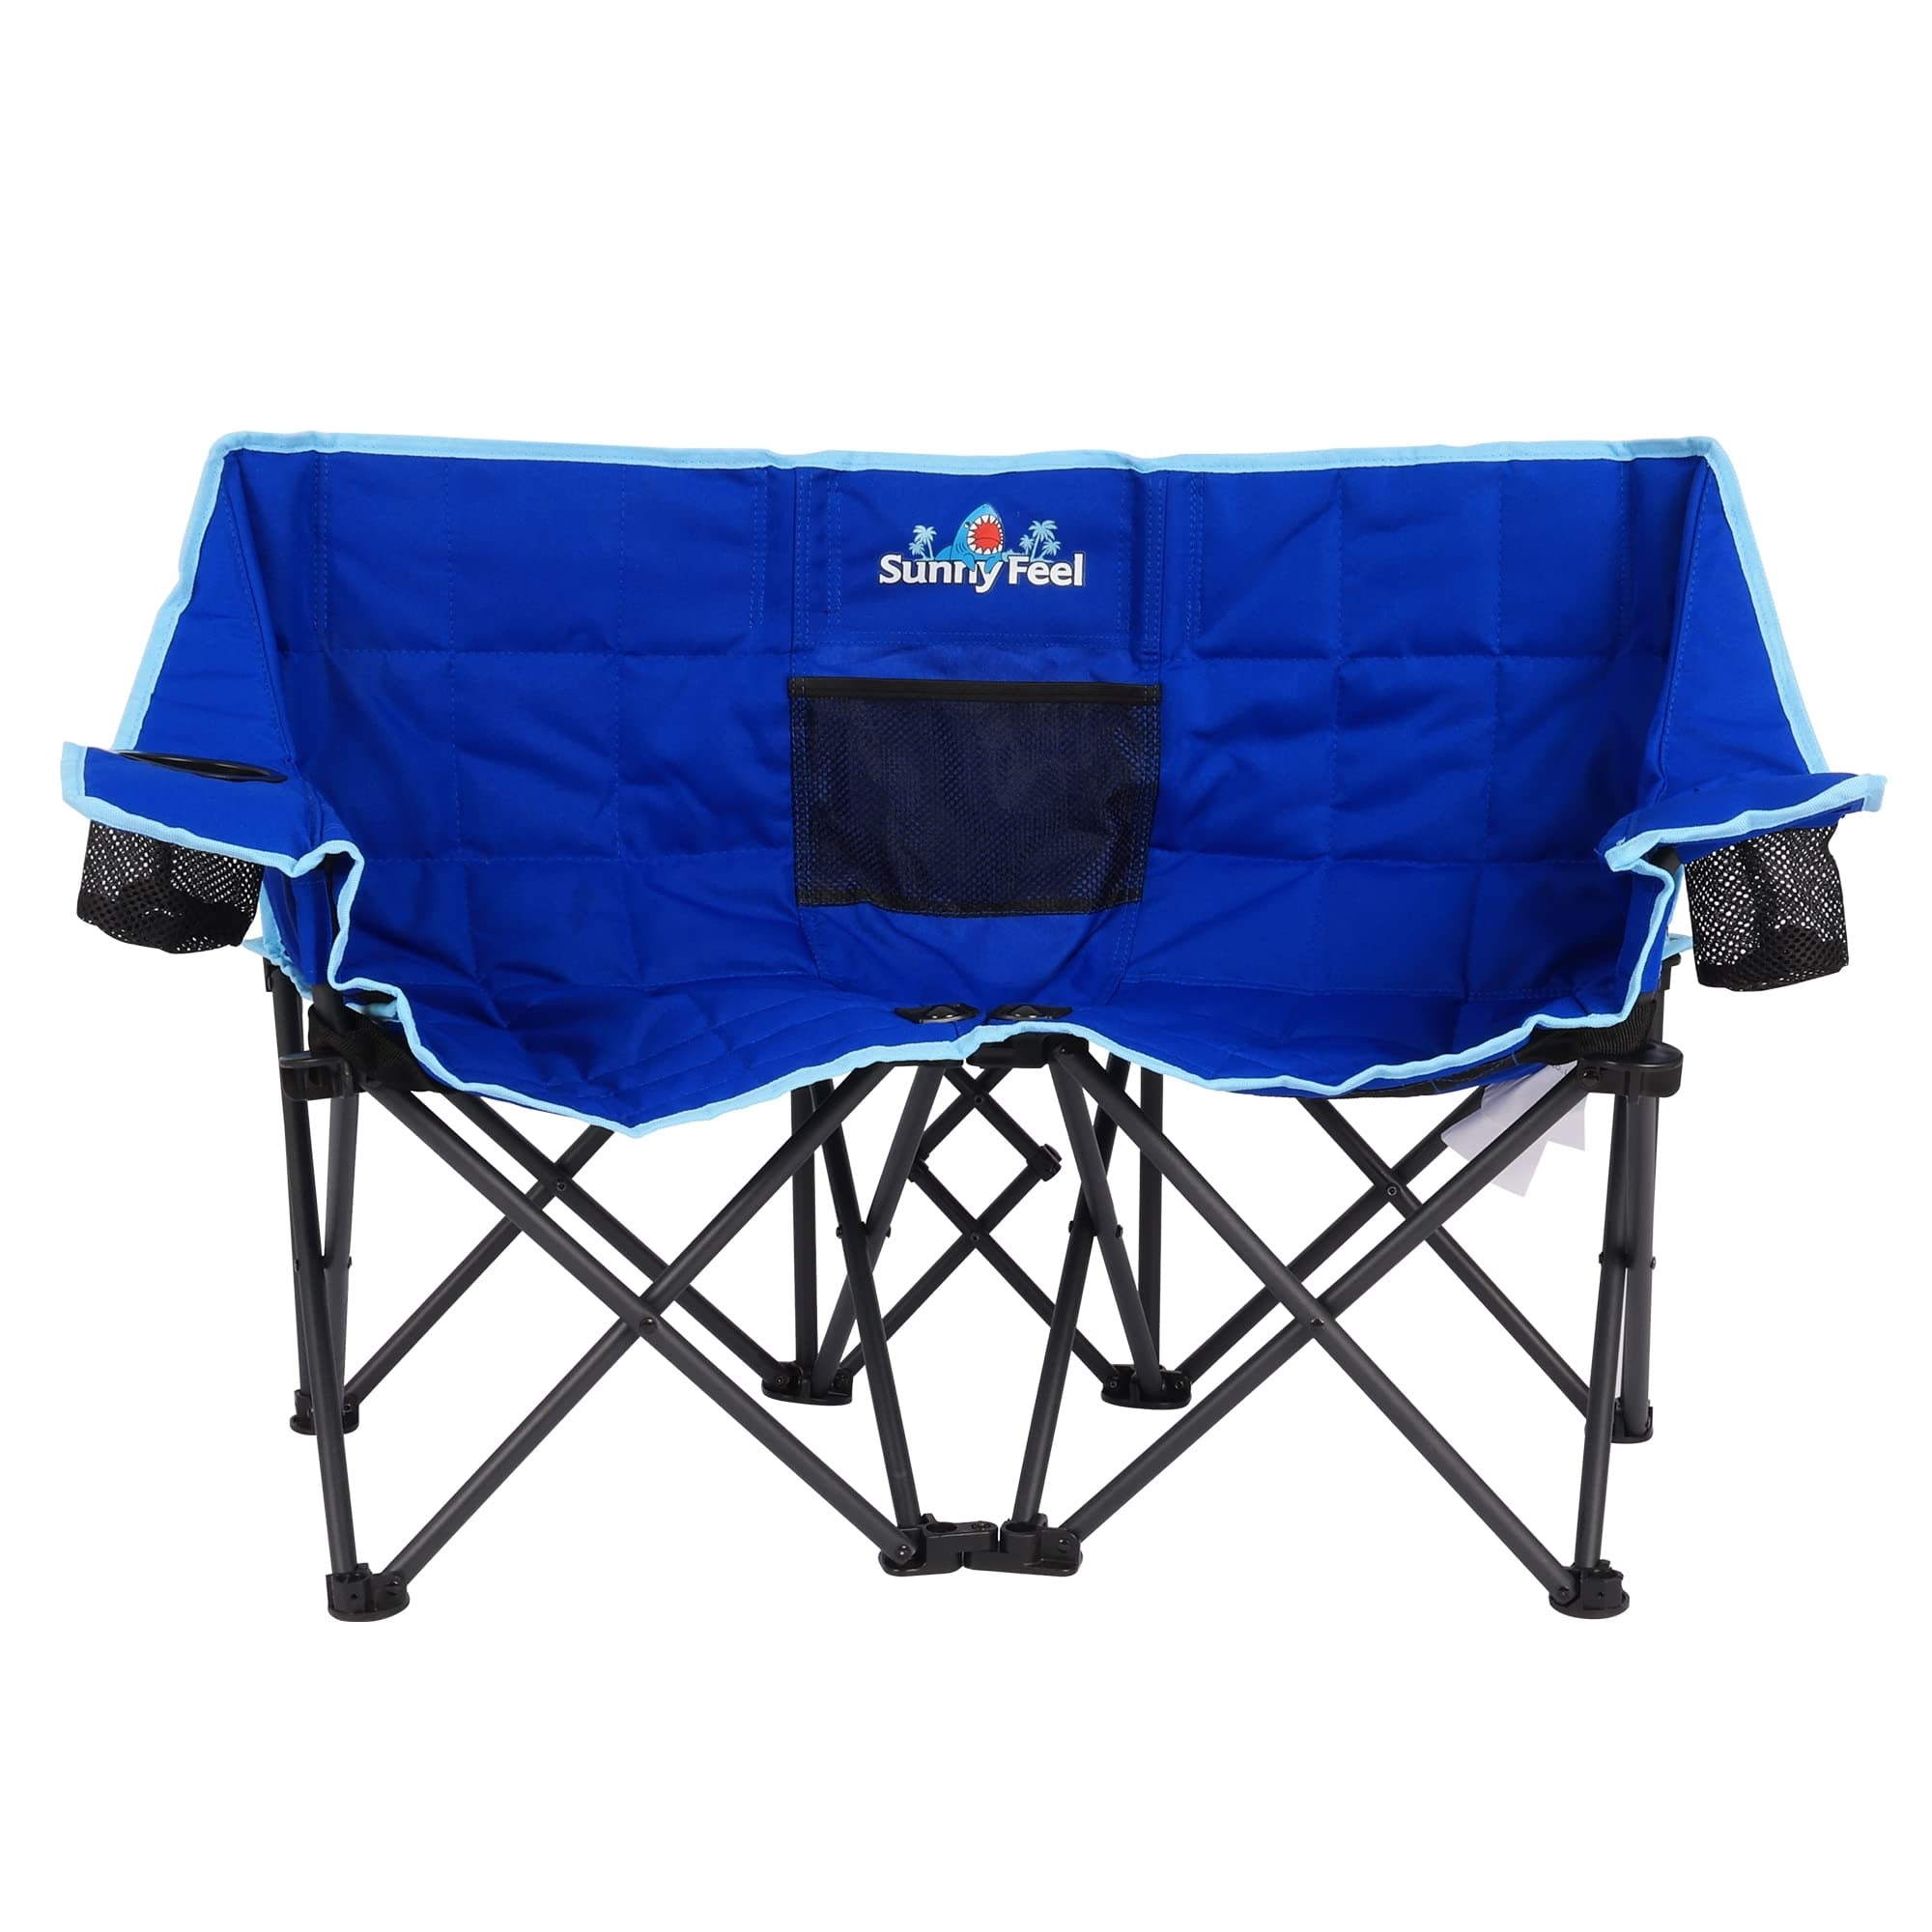 Kids-blue Folding Double Camping Chair,Heavy Duty Portable/Foldable Lawn  Chair - Bed Bath & Beyond - 37453926